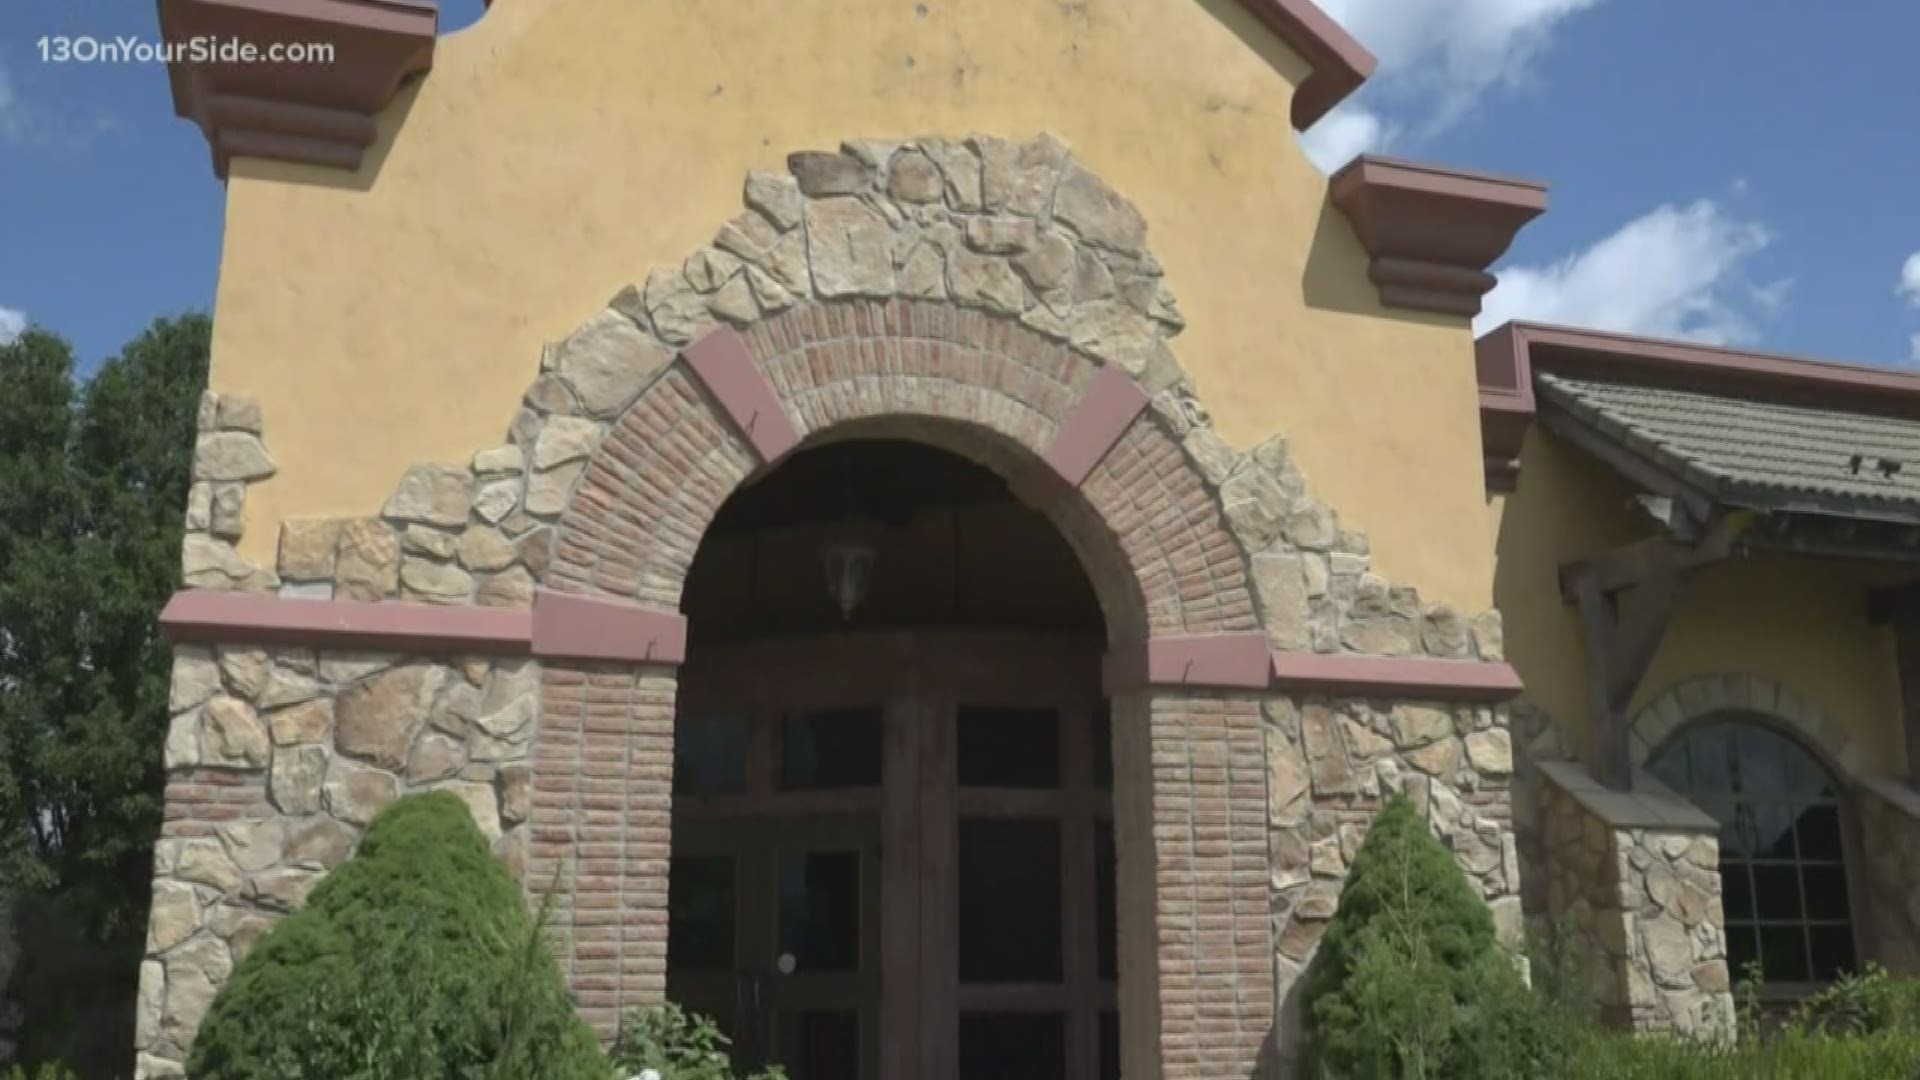 Romano's Macaroni Grill closed in 2017 after the restaurant chain filed bankruptcy. It's been vacant ever since.